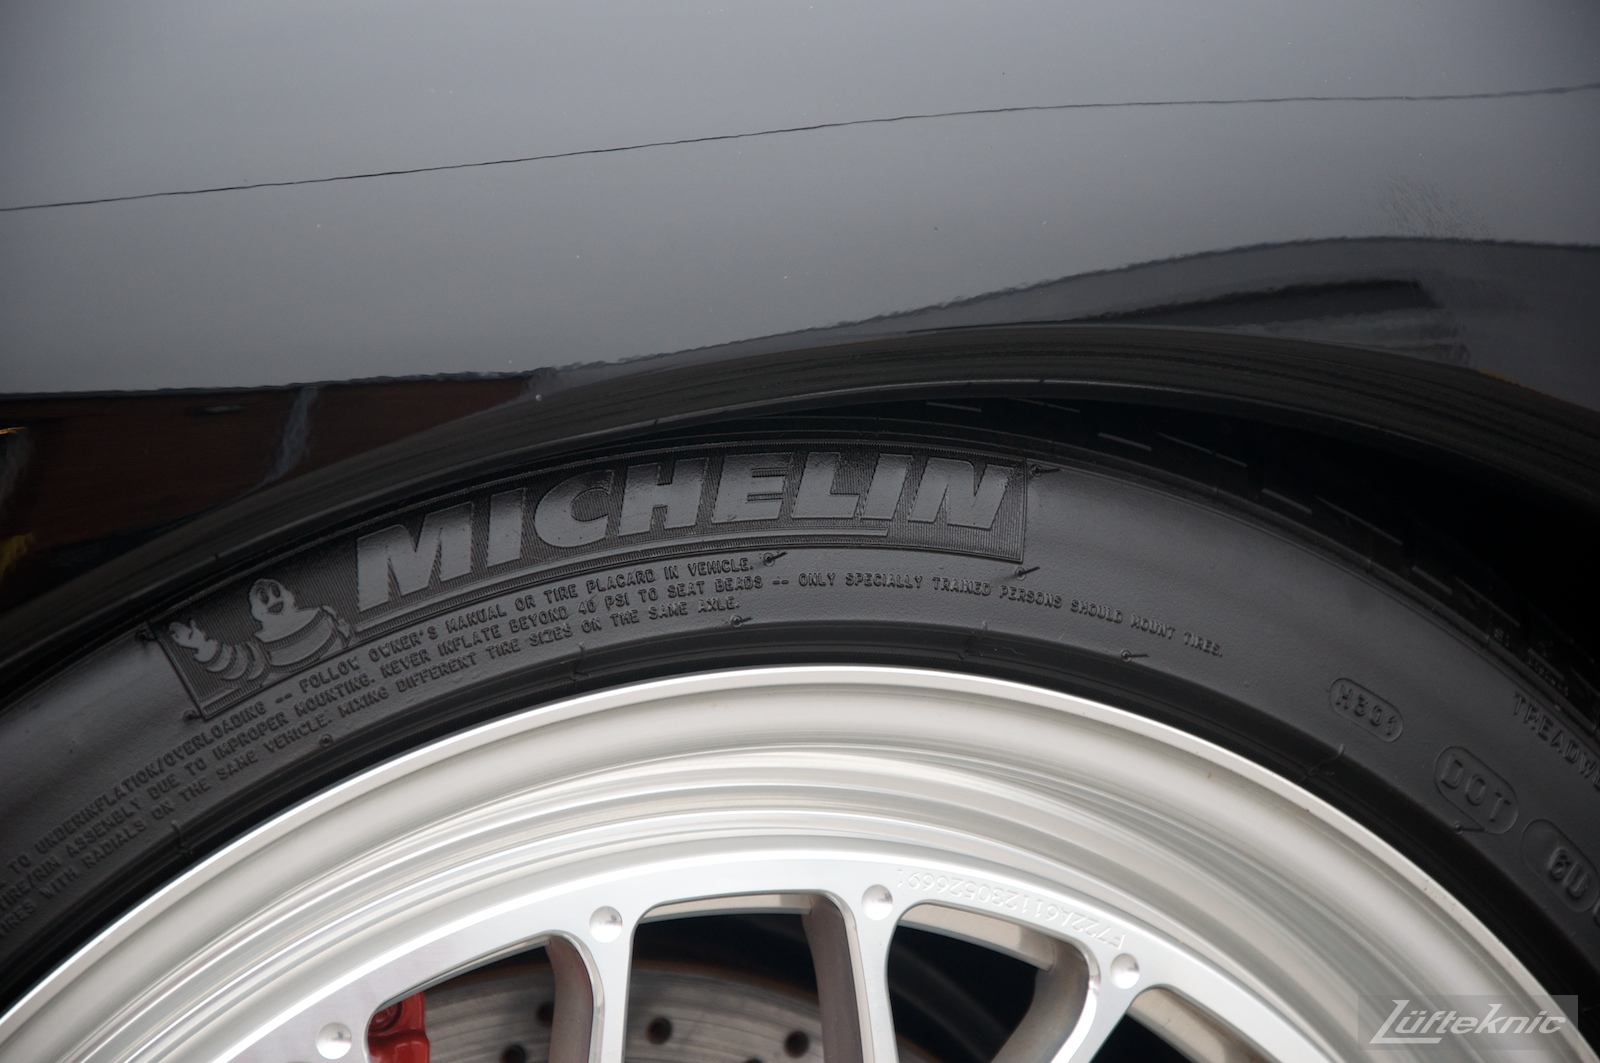 Detail shot of the Michelin Pilot tire and Fikse wheel on a black 993 Porsche Turbo.